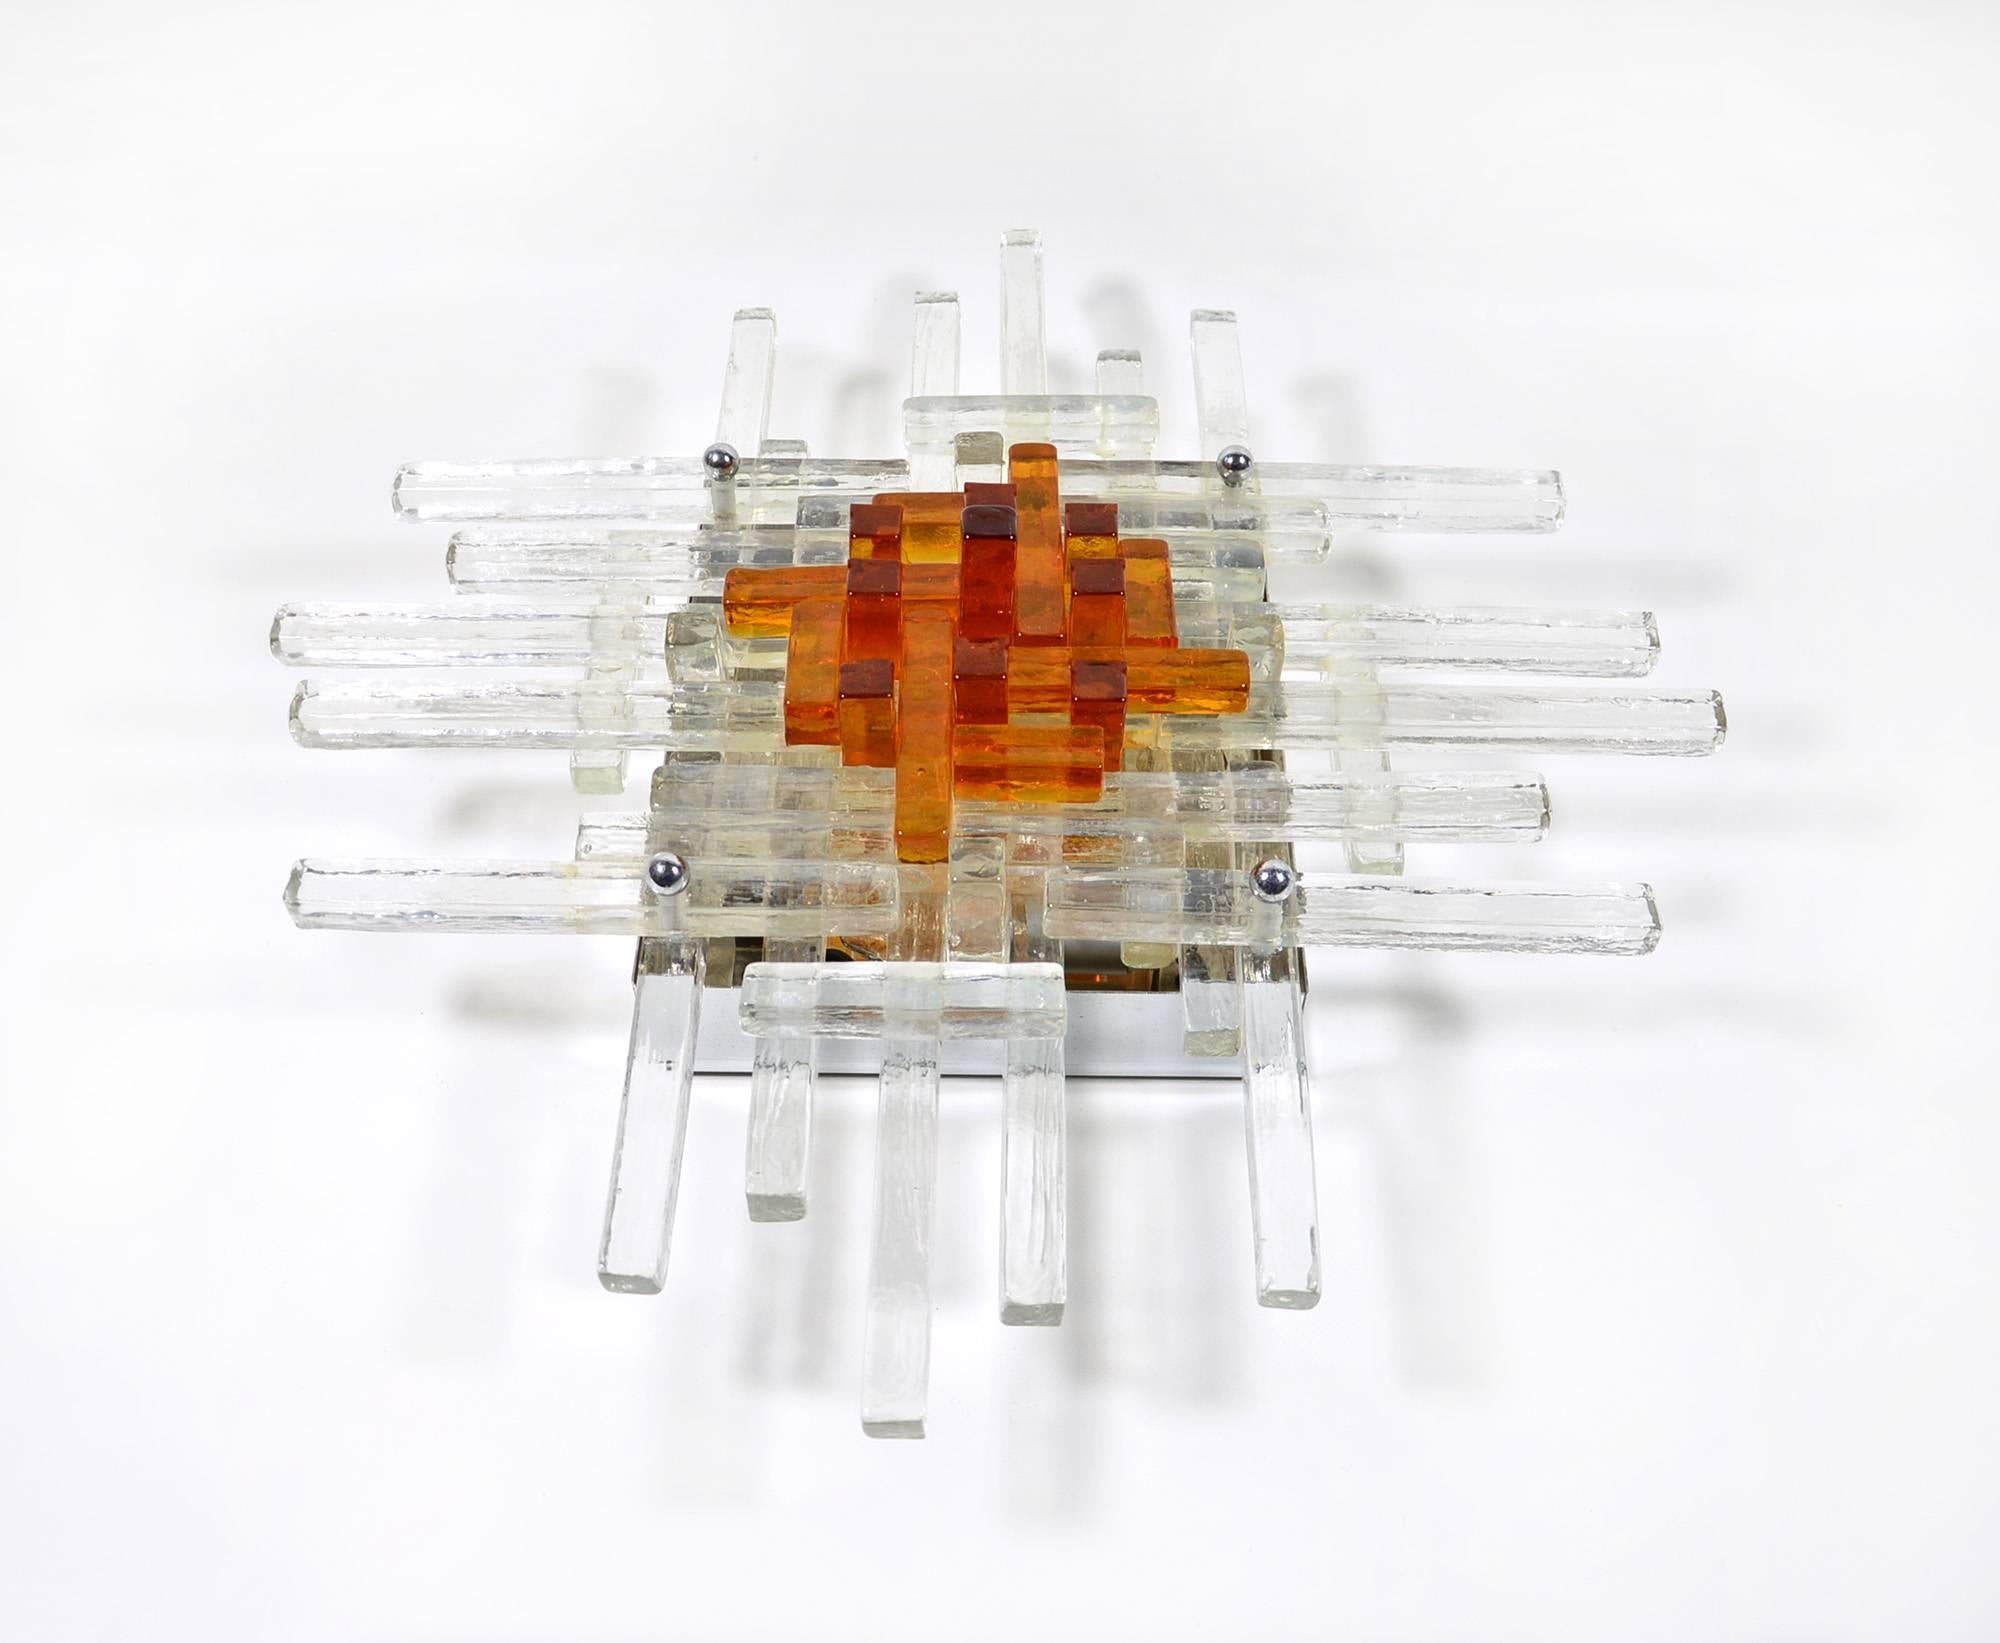 This lamp, made of amber and transparent glass with a chromed metal structure, was designed in 1970s by Albano Poli for his firm Poliarte, based in Verona, Italy.
It can be mounted on a wall or a ceiling and carries 4 incandescent or led bulbs with